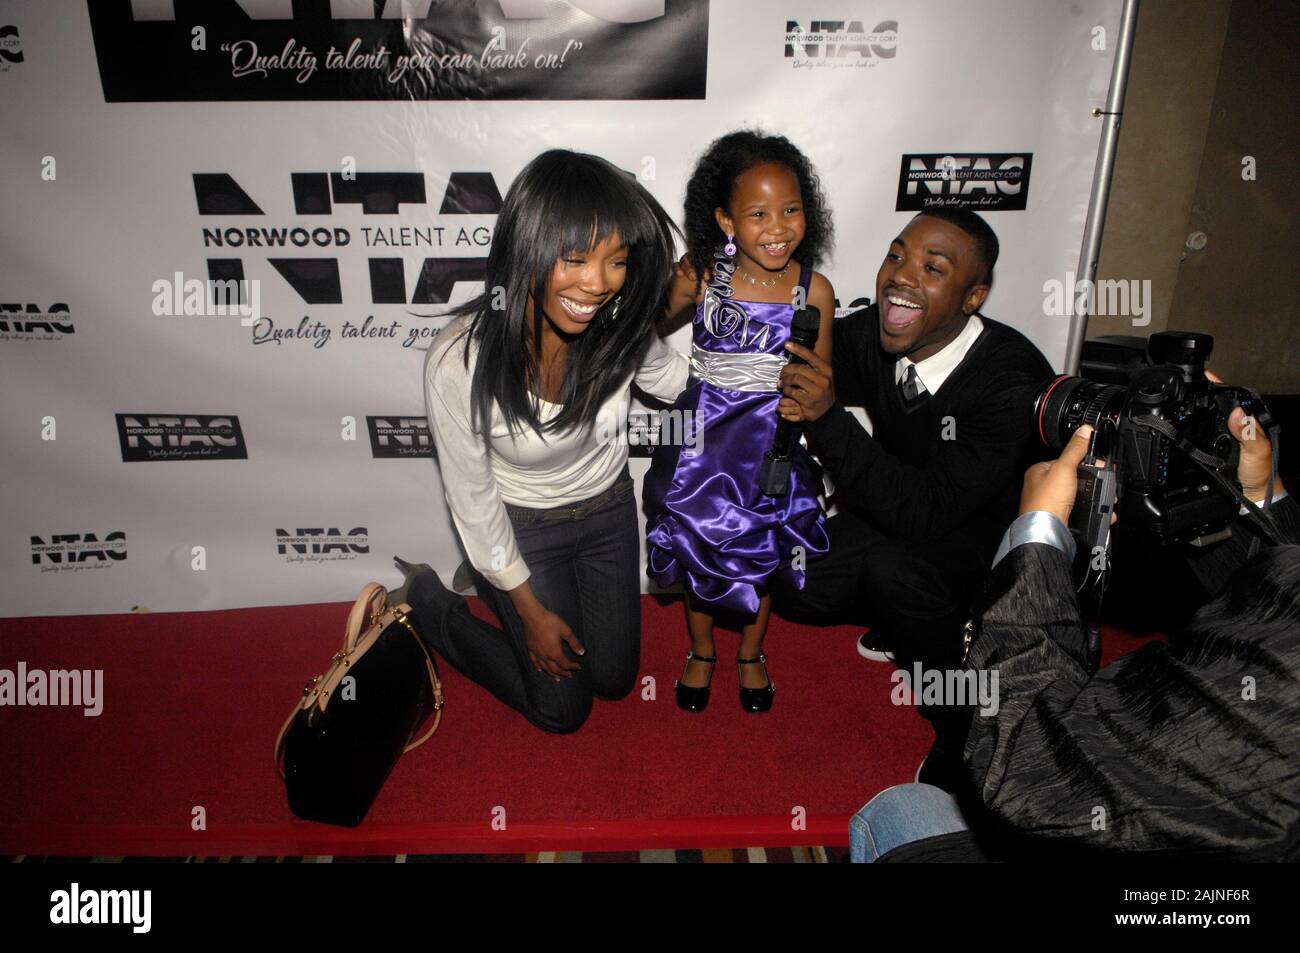 (L-R) Brandy, Harmony Love Bailey and Ray J attend the Norwood Talent Agency Corporation (NTAC) Grand Opening at the Hollywood Roosevelt Hotel on May 10, 2011 in Los Angeles. Stock Photo